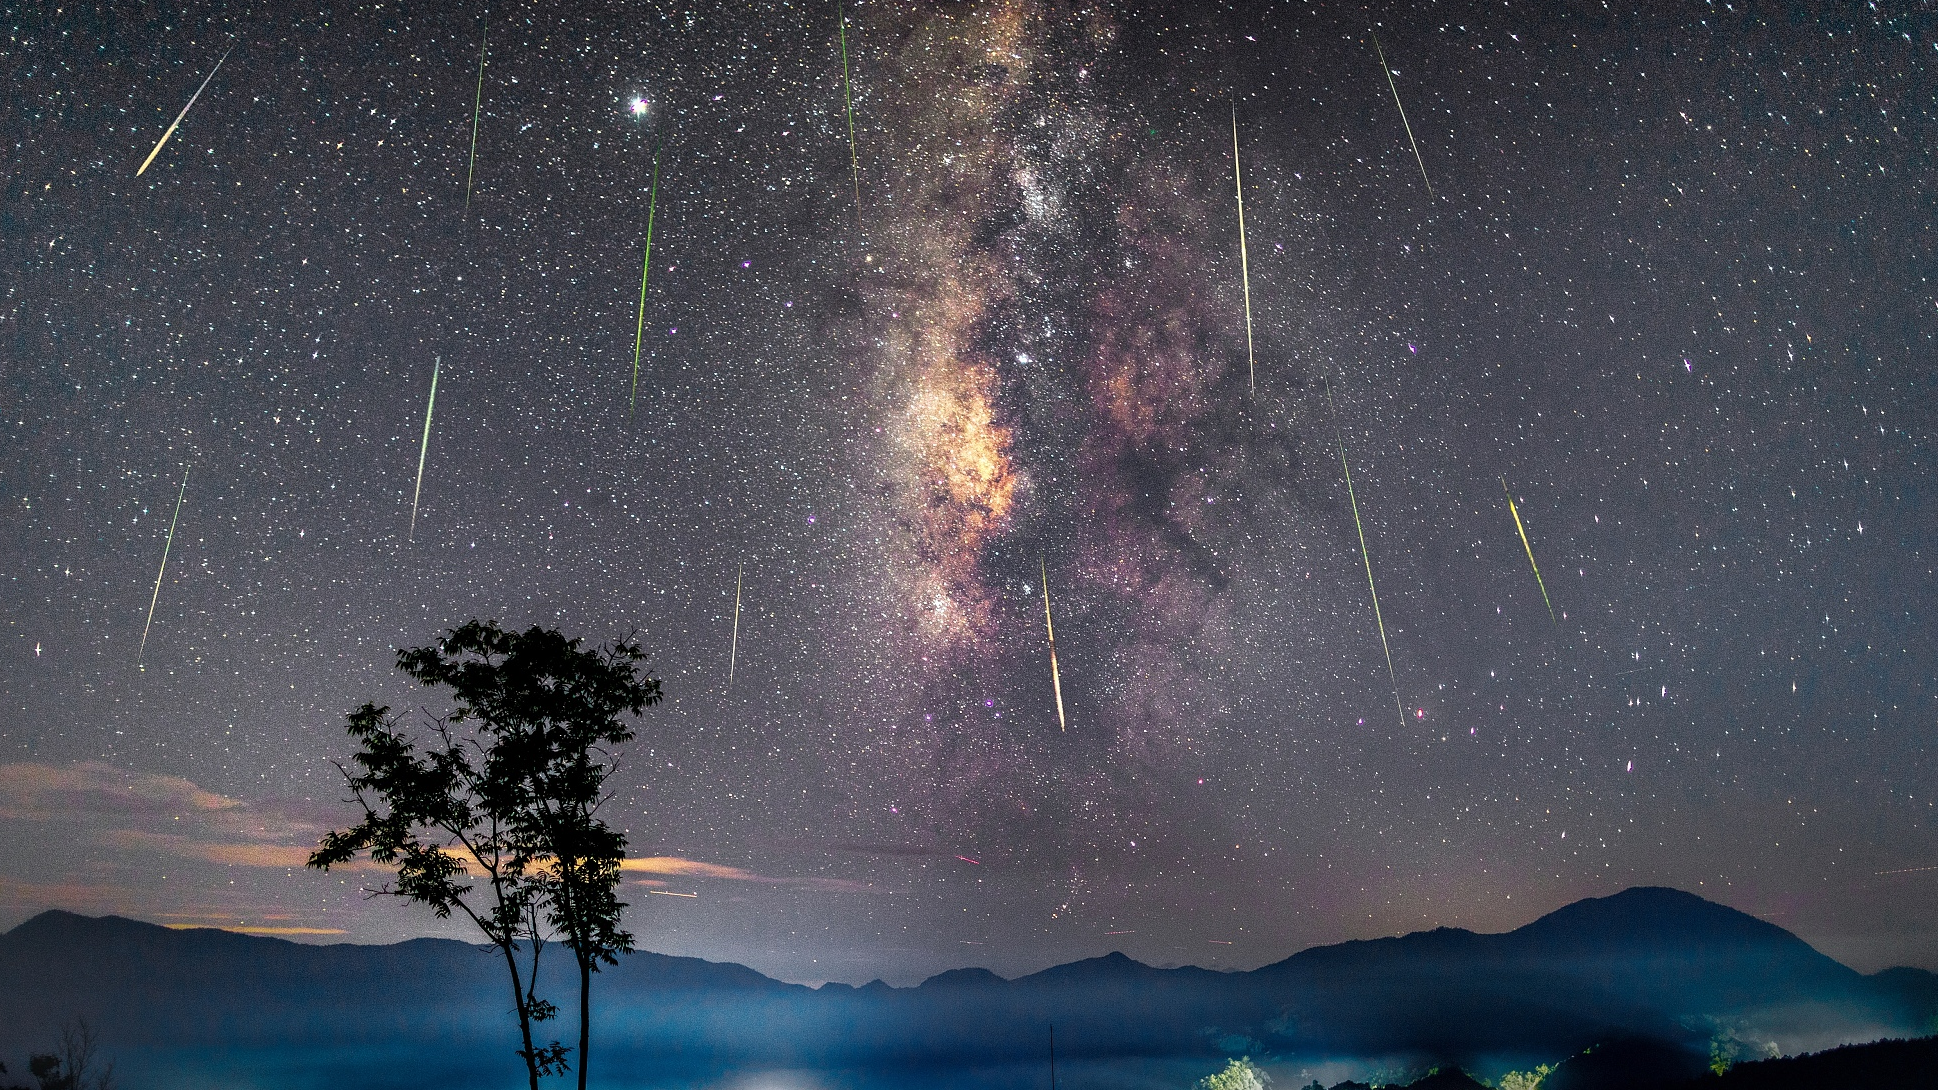 A shot of the Perseid meteor shower